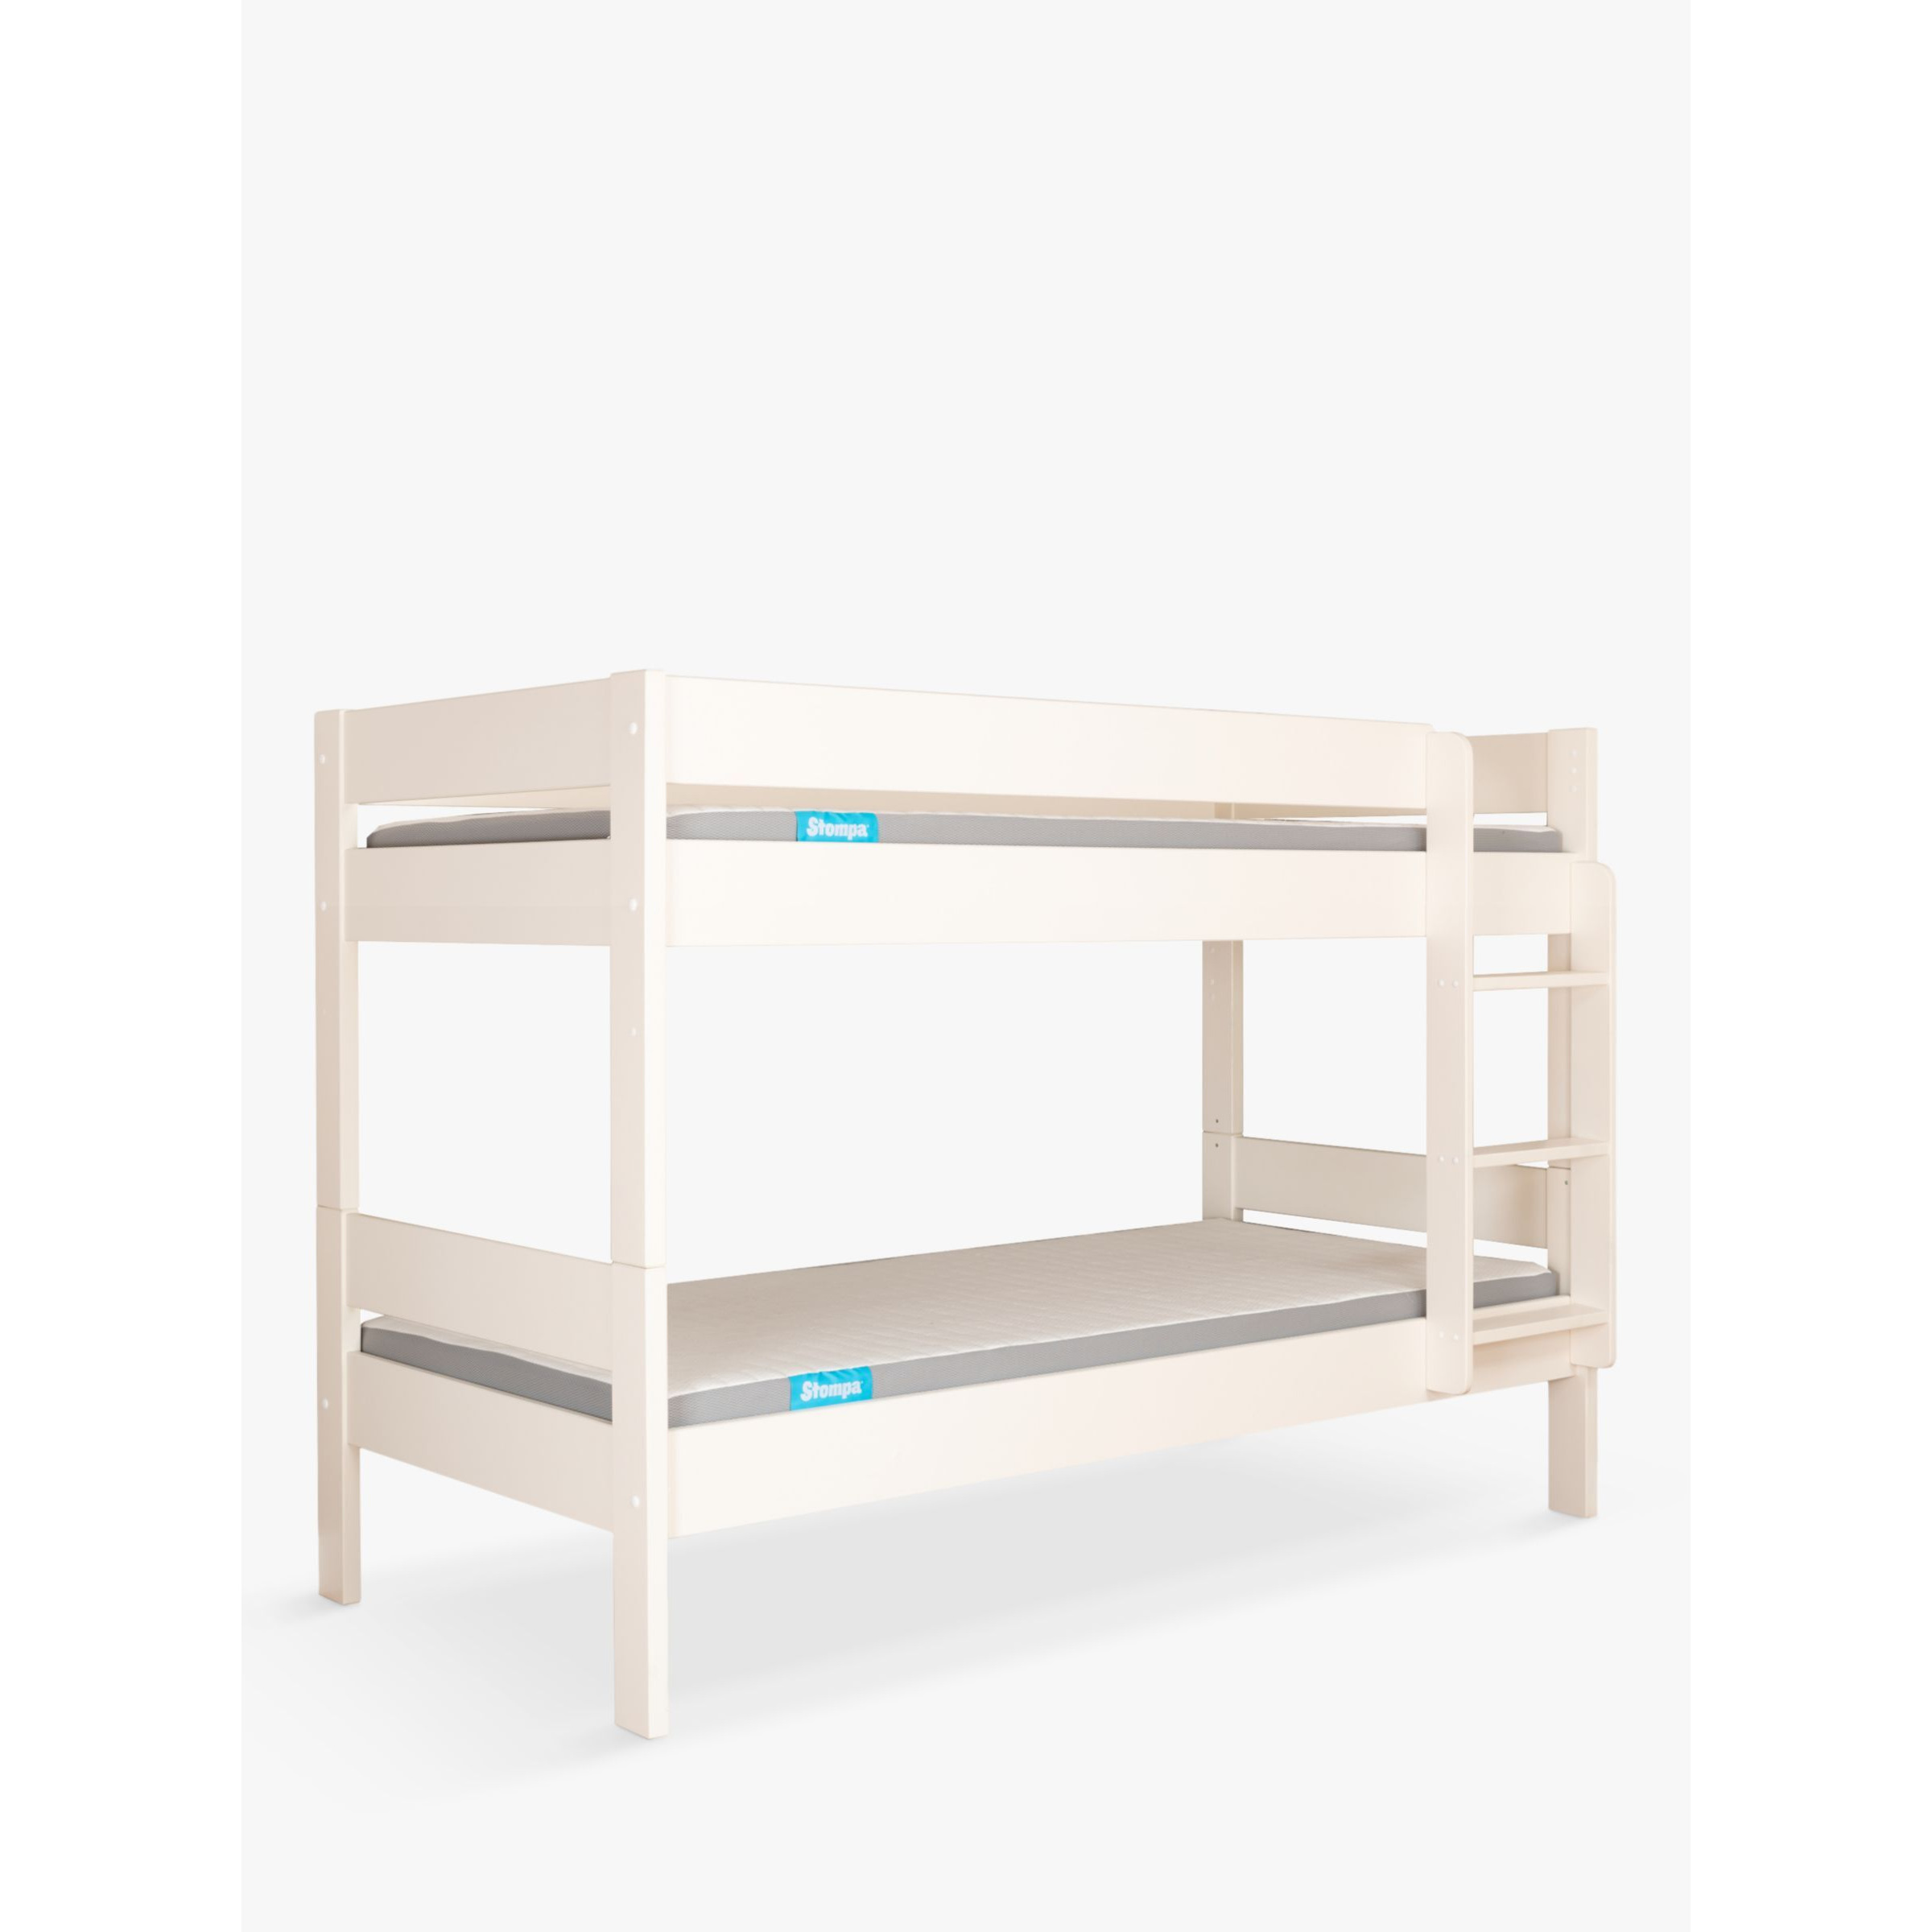 Stompa Compact Detachable Bunk Bed, Single, White - image 1